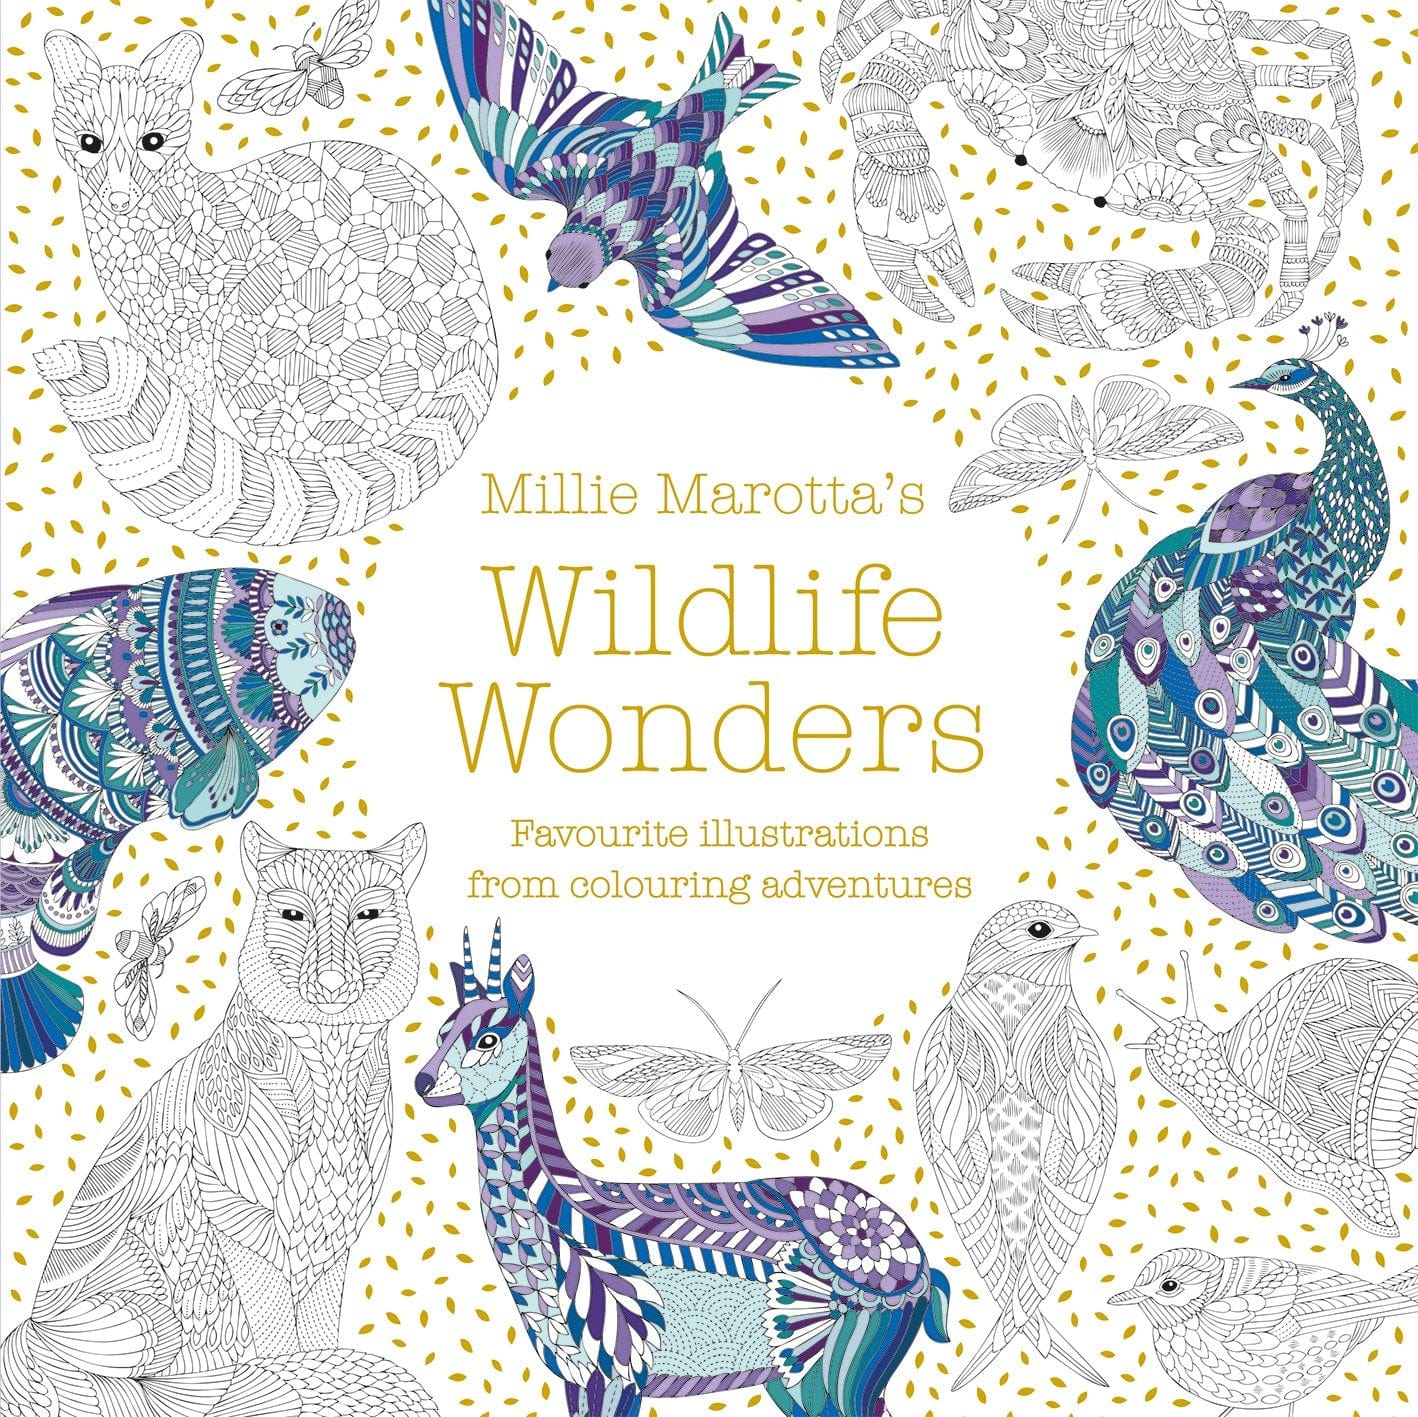 MILLIE MAROTTA'S WILDLIFE WONDERS : FAVOURITE ILLUSTRATIONS FROM COLOURING ADVENTURES